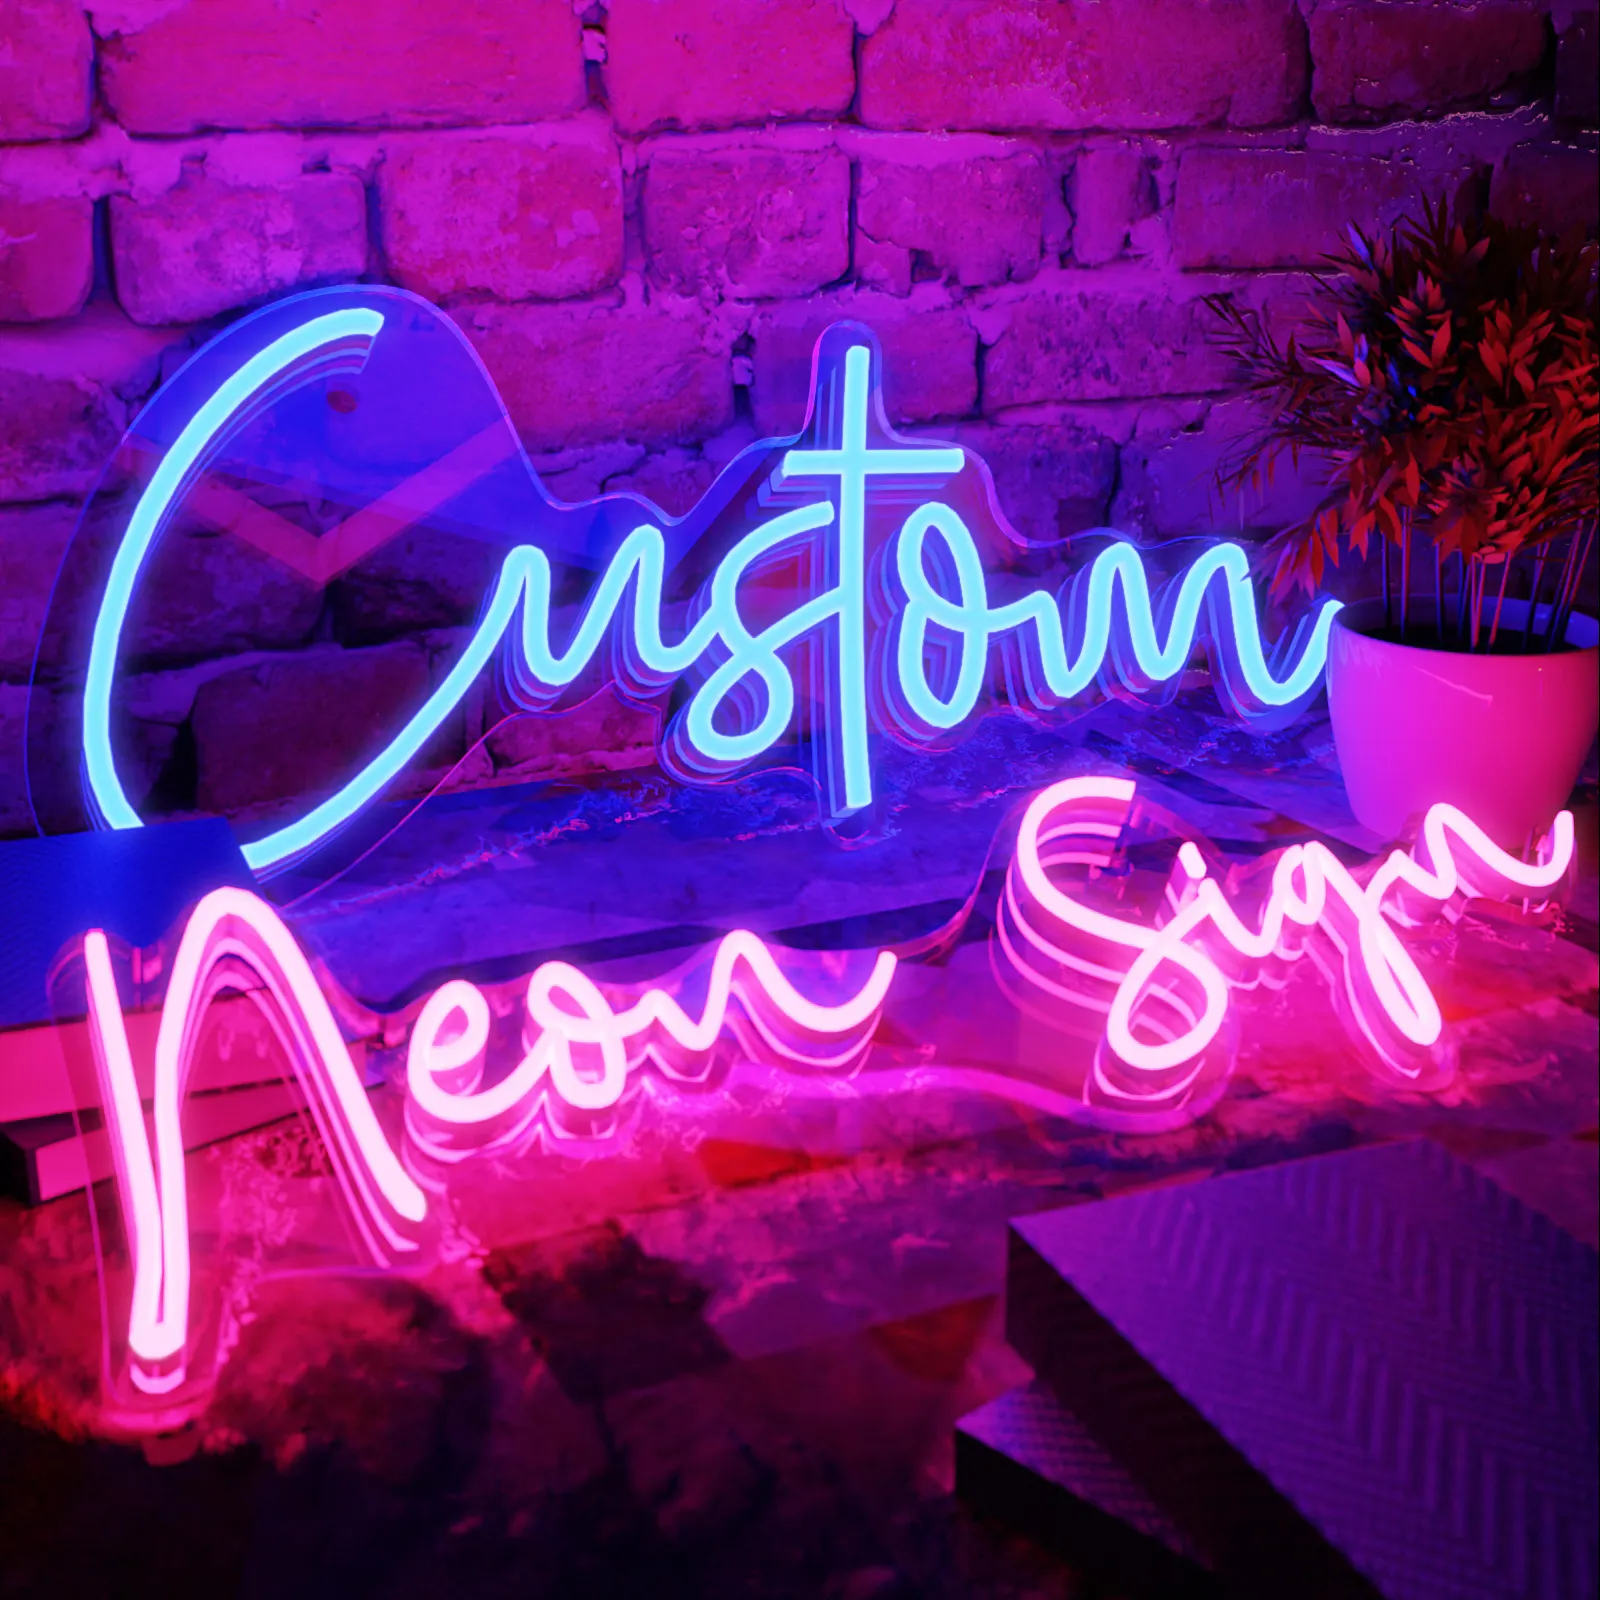 Wall Neon Lights Led Neon Sign Dialogue Box Letters Party Stores Bar Shop Restaurant Decor Light